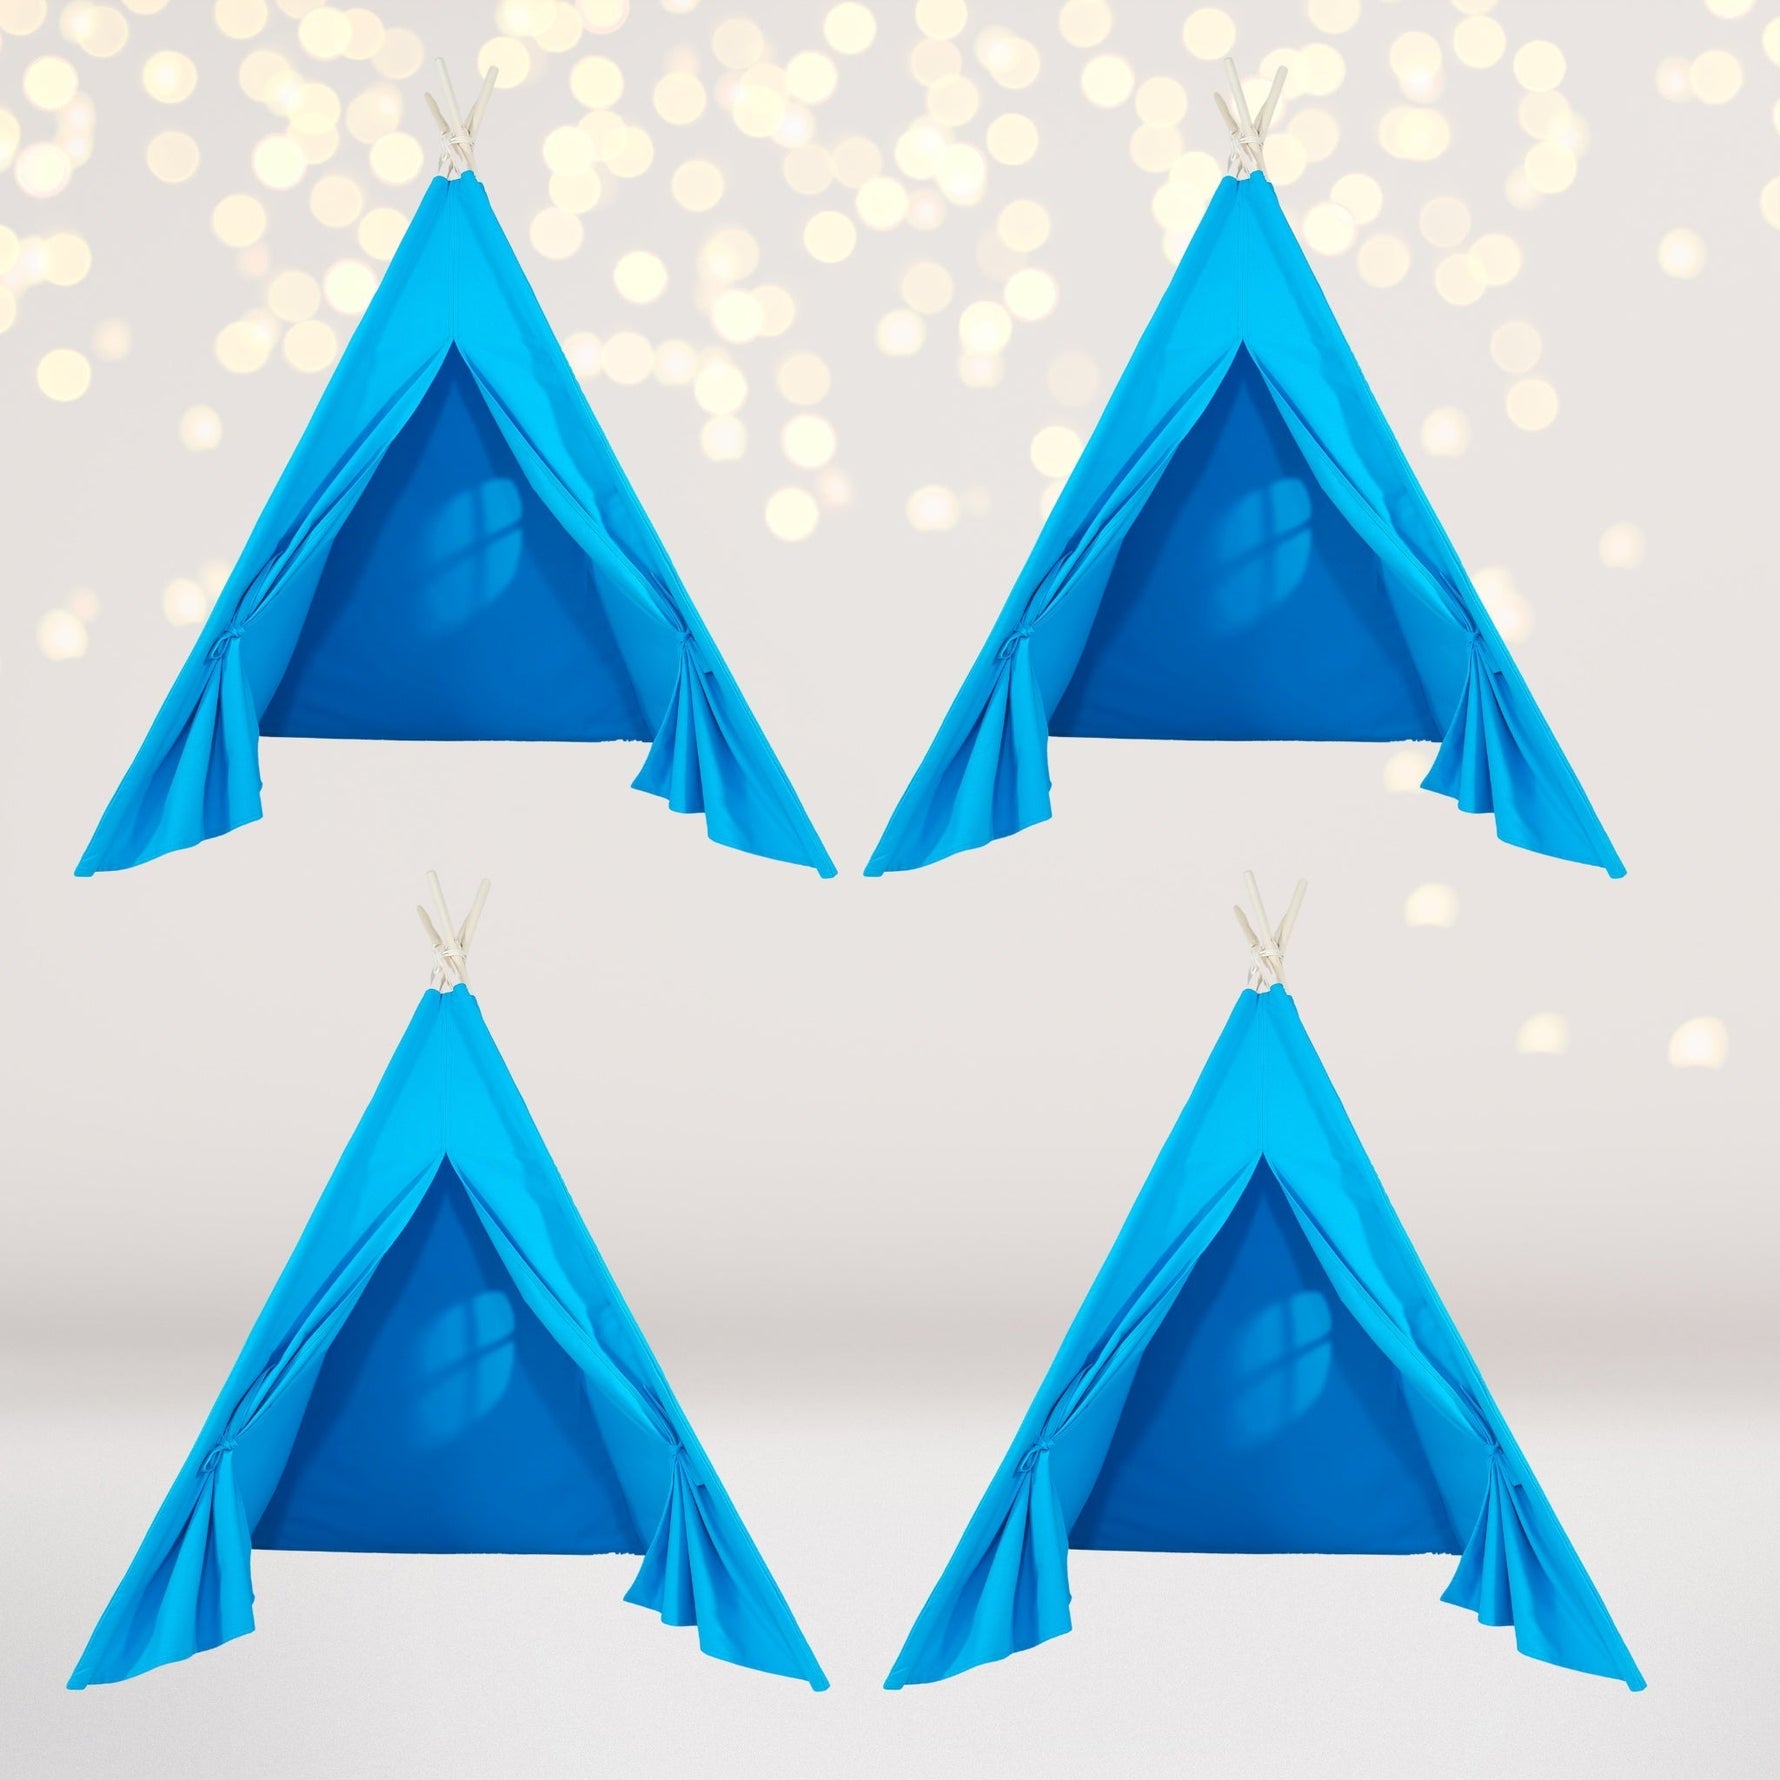 4 pack Kids Sleepover Tents-LUXE Kids Teepee Tent with Lights-Party Pack Turquoise